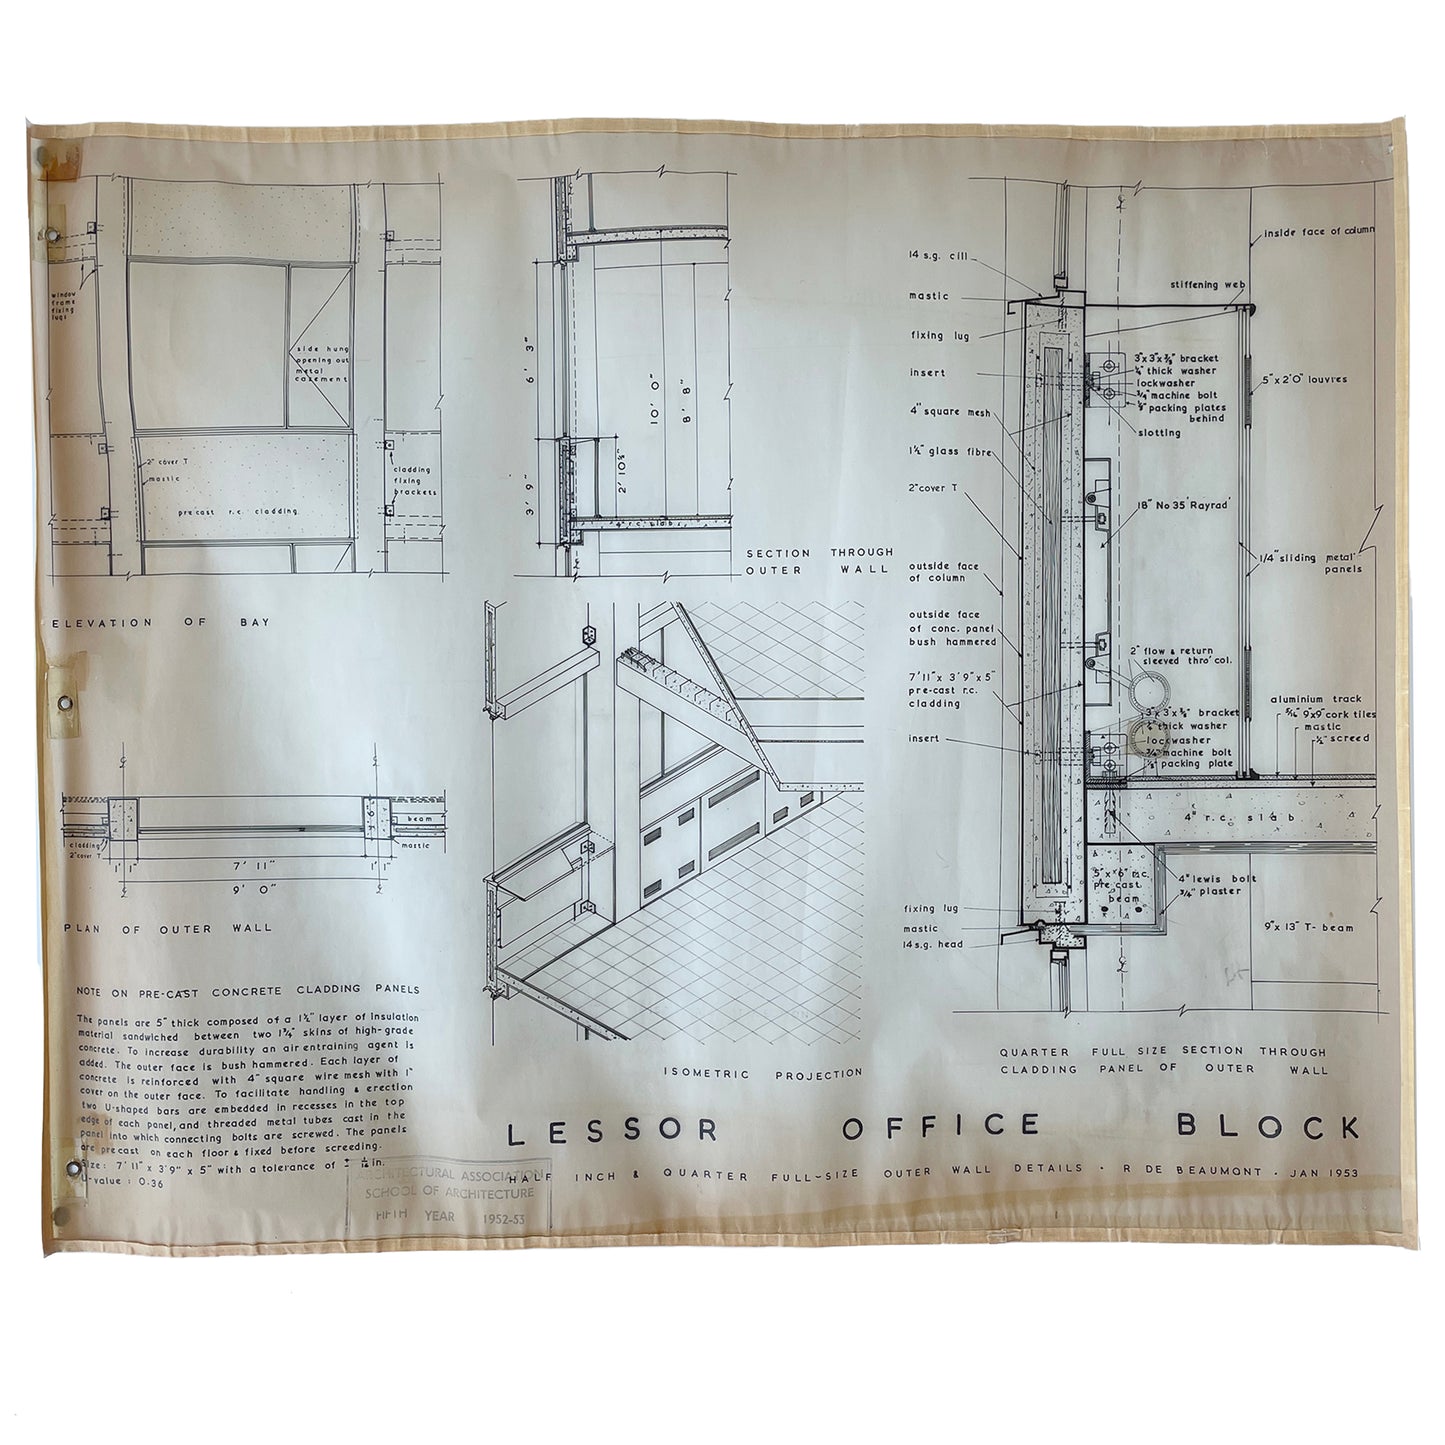 Set of 1952/53 Architectural Plans – Office Building